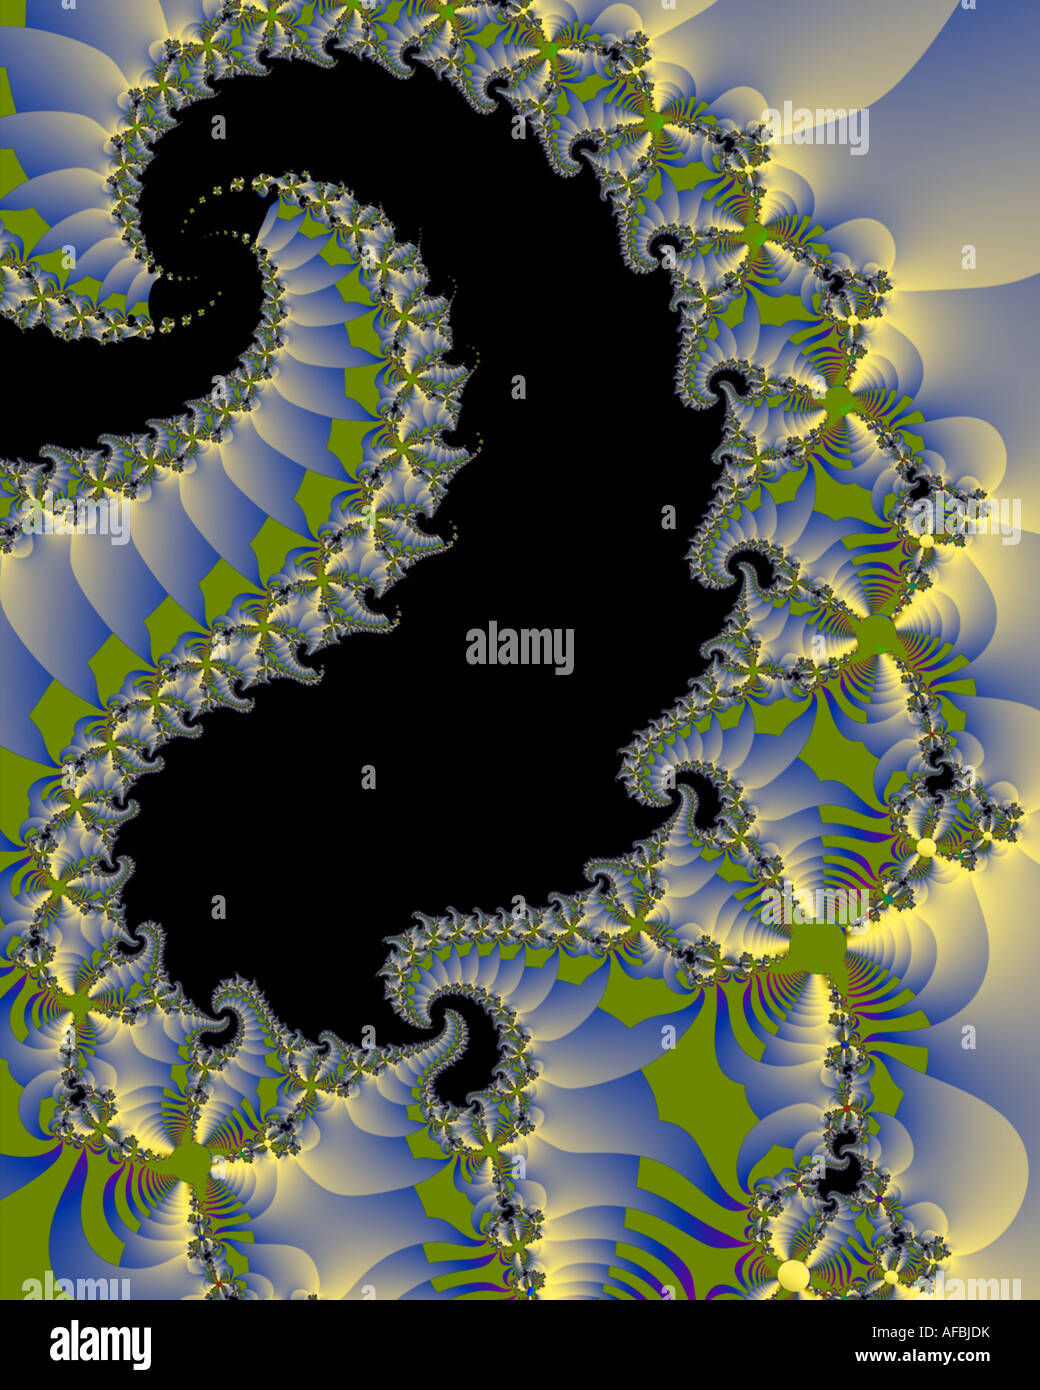 Abstract fractal dragon or serpent form with diffused lights Stock Photo